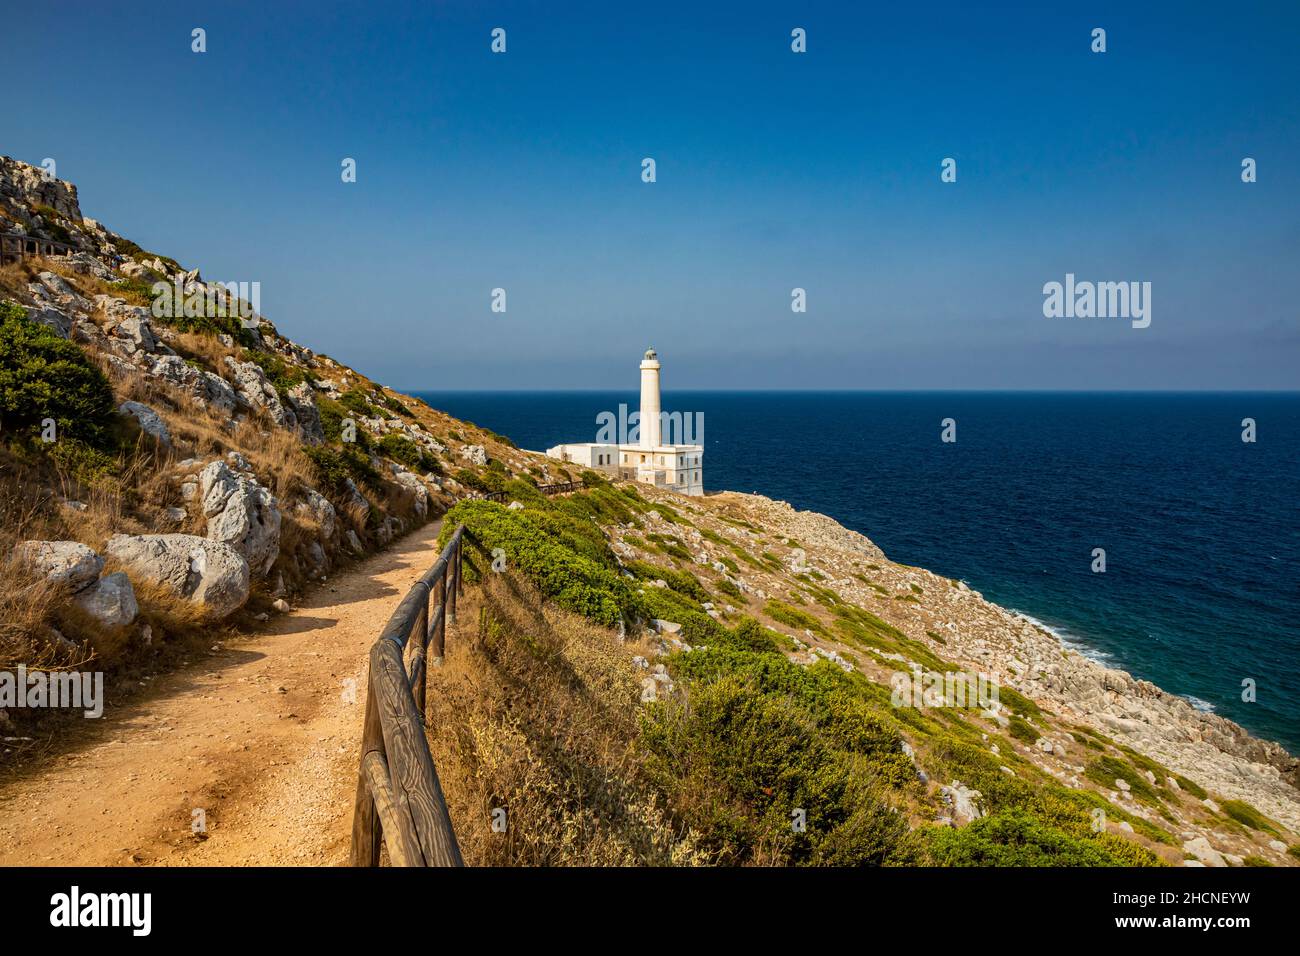 The lighthouse of Punta Palascia, in Otranto, Lecce, Salento, Puglia, Italy. The cape is Italy's most easterly point. The building is on the promontor Stock Photo